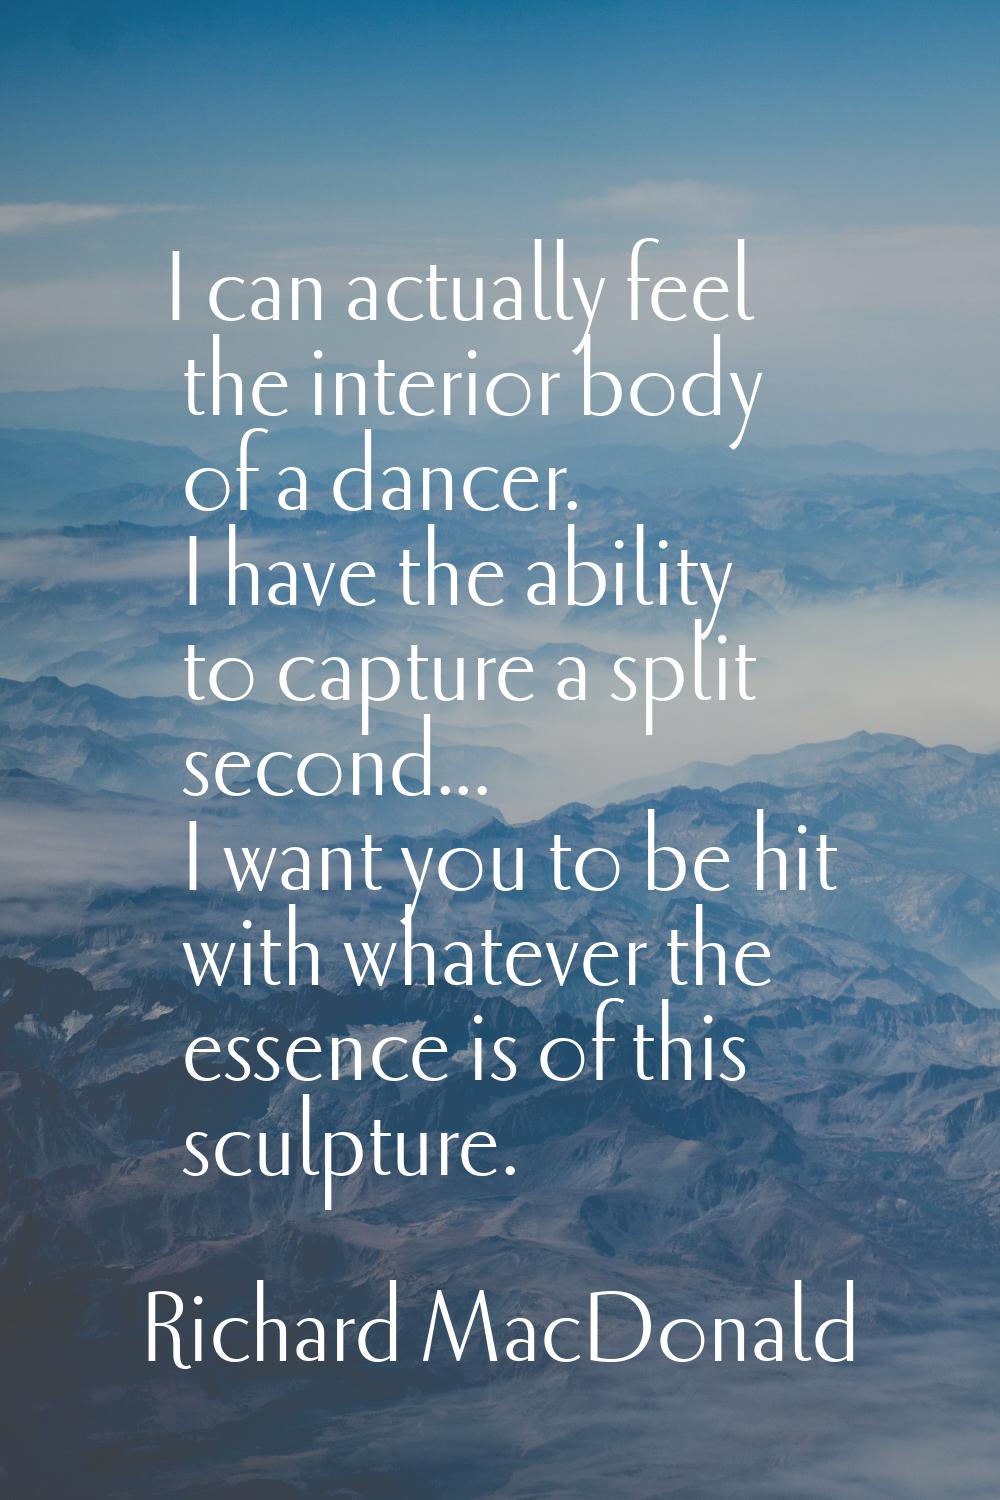 I can actually feel the interior body of a dancer. I have the ability to capture a split second... 